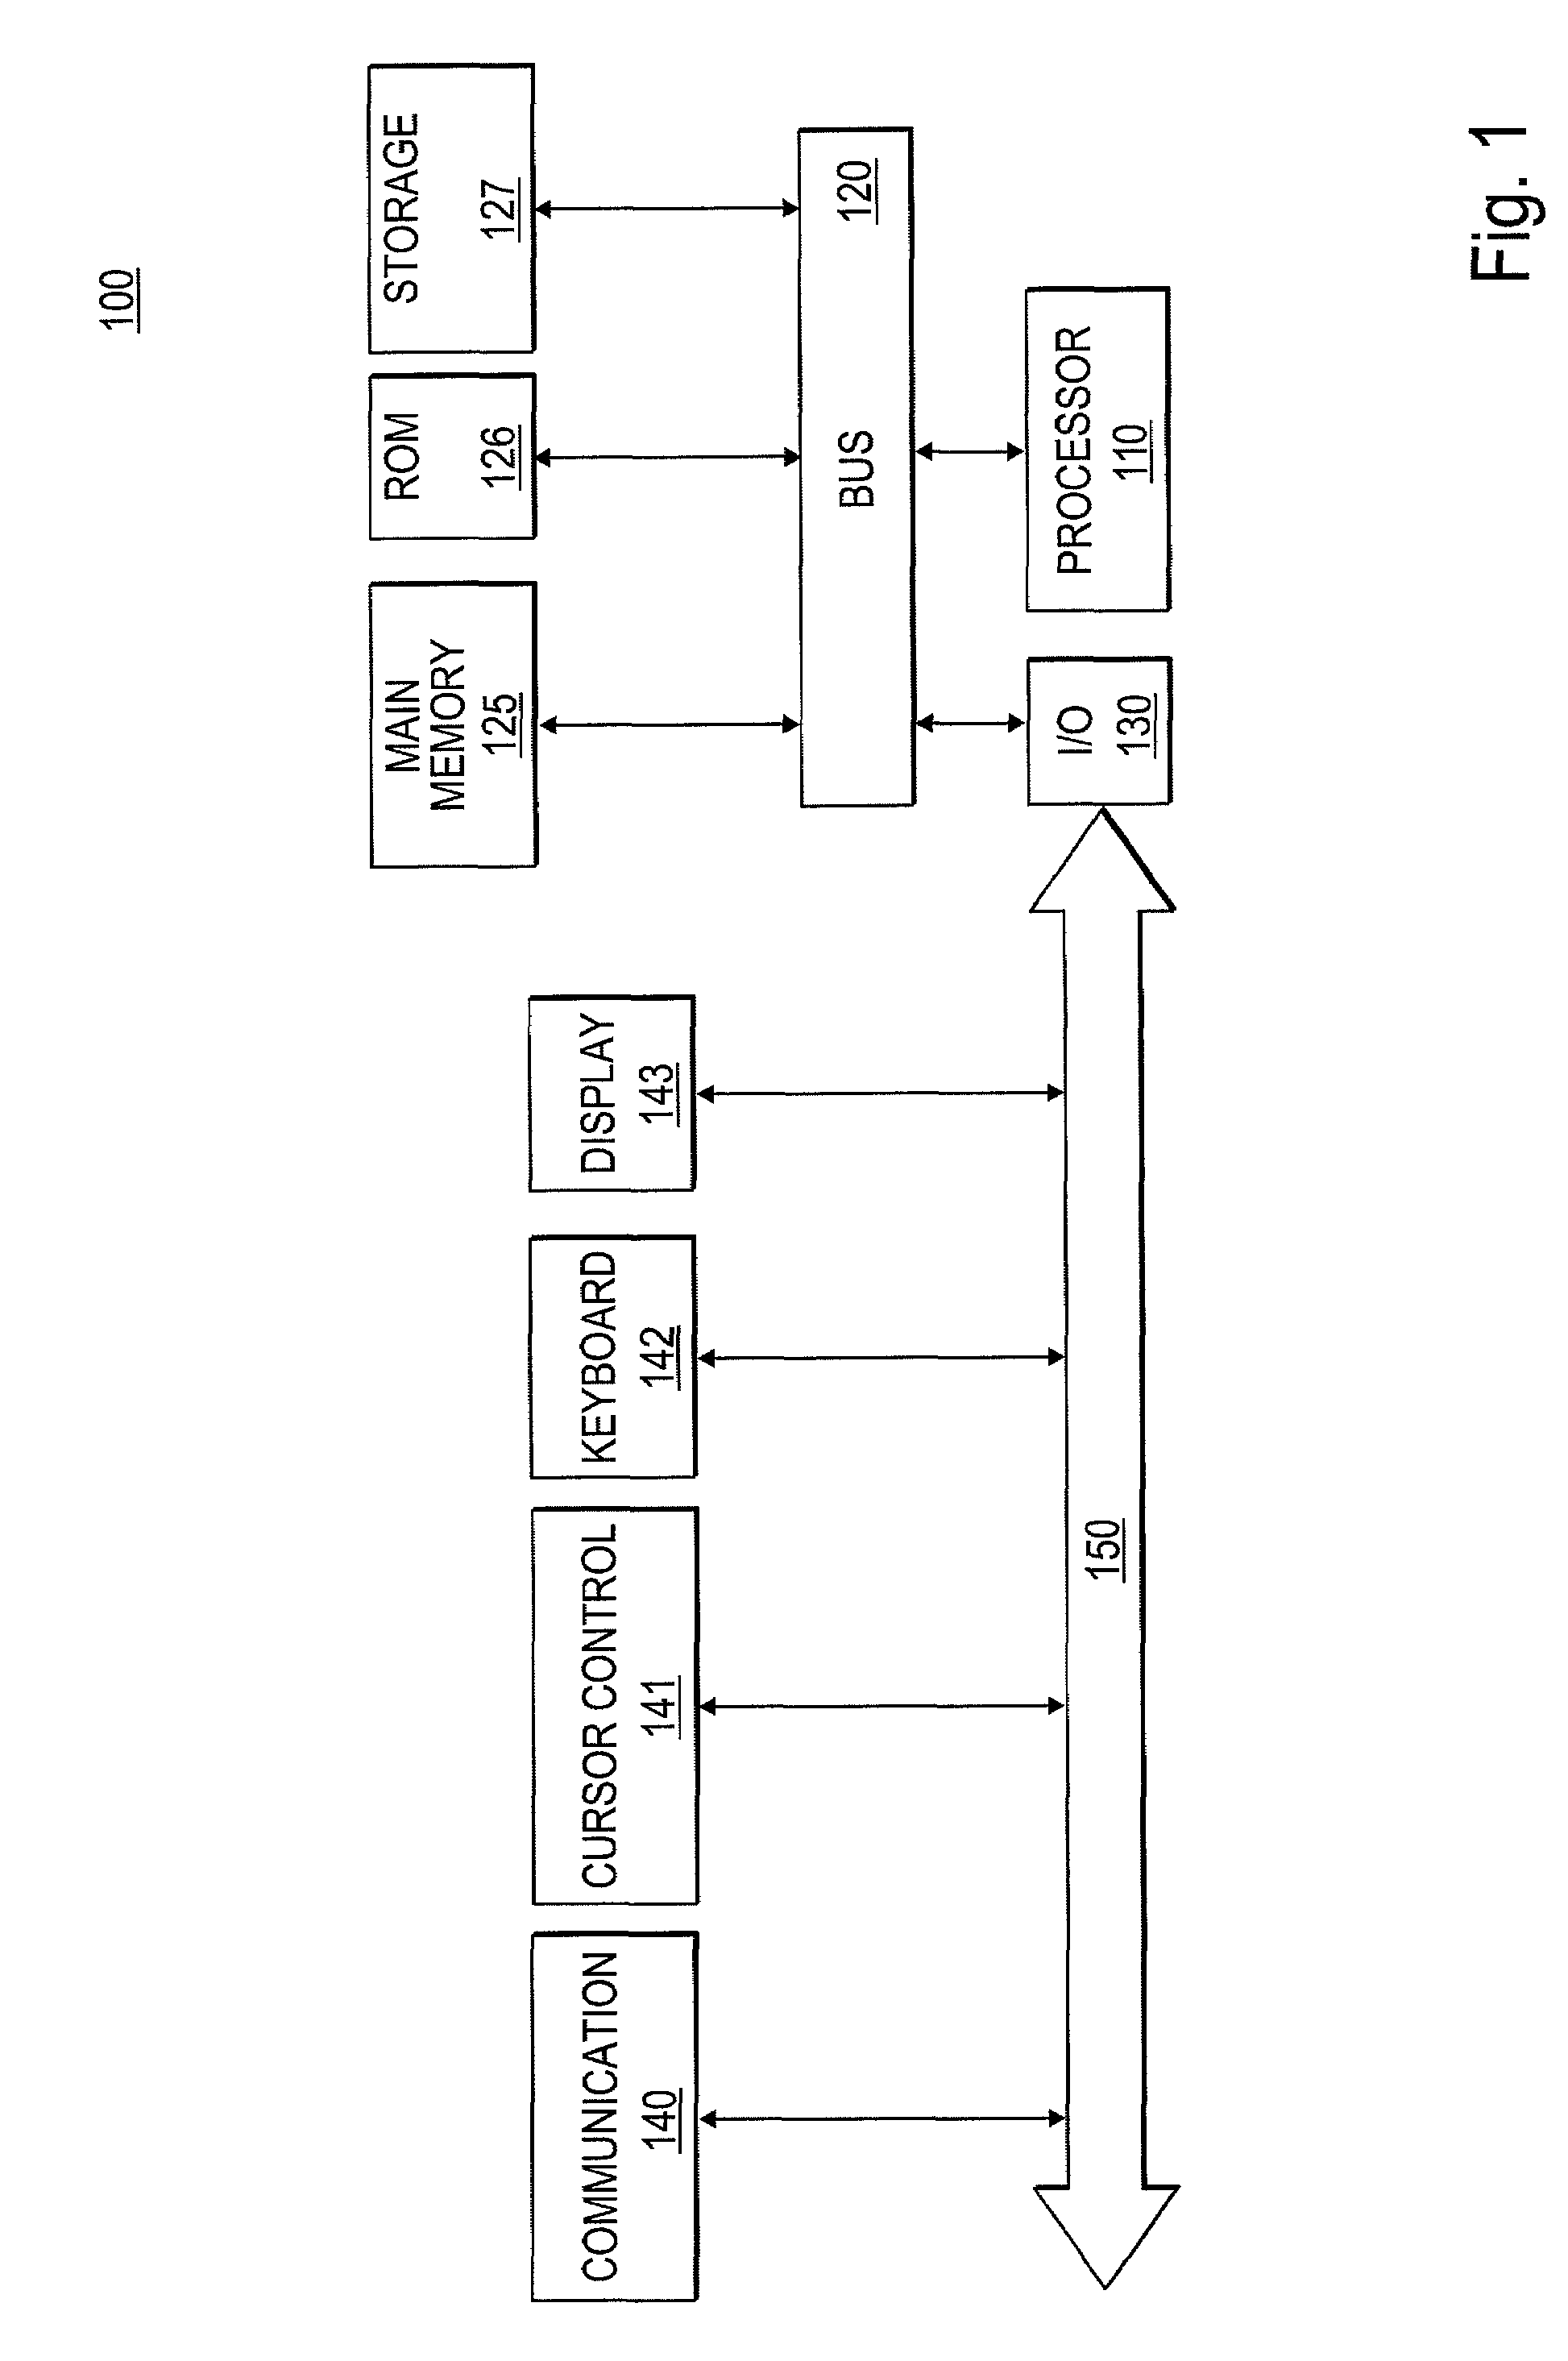 Method and system for collaborative profiling for continuous detection of profile phase transitions